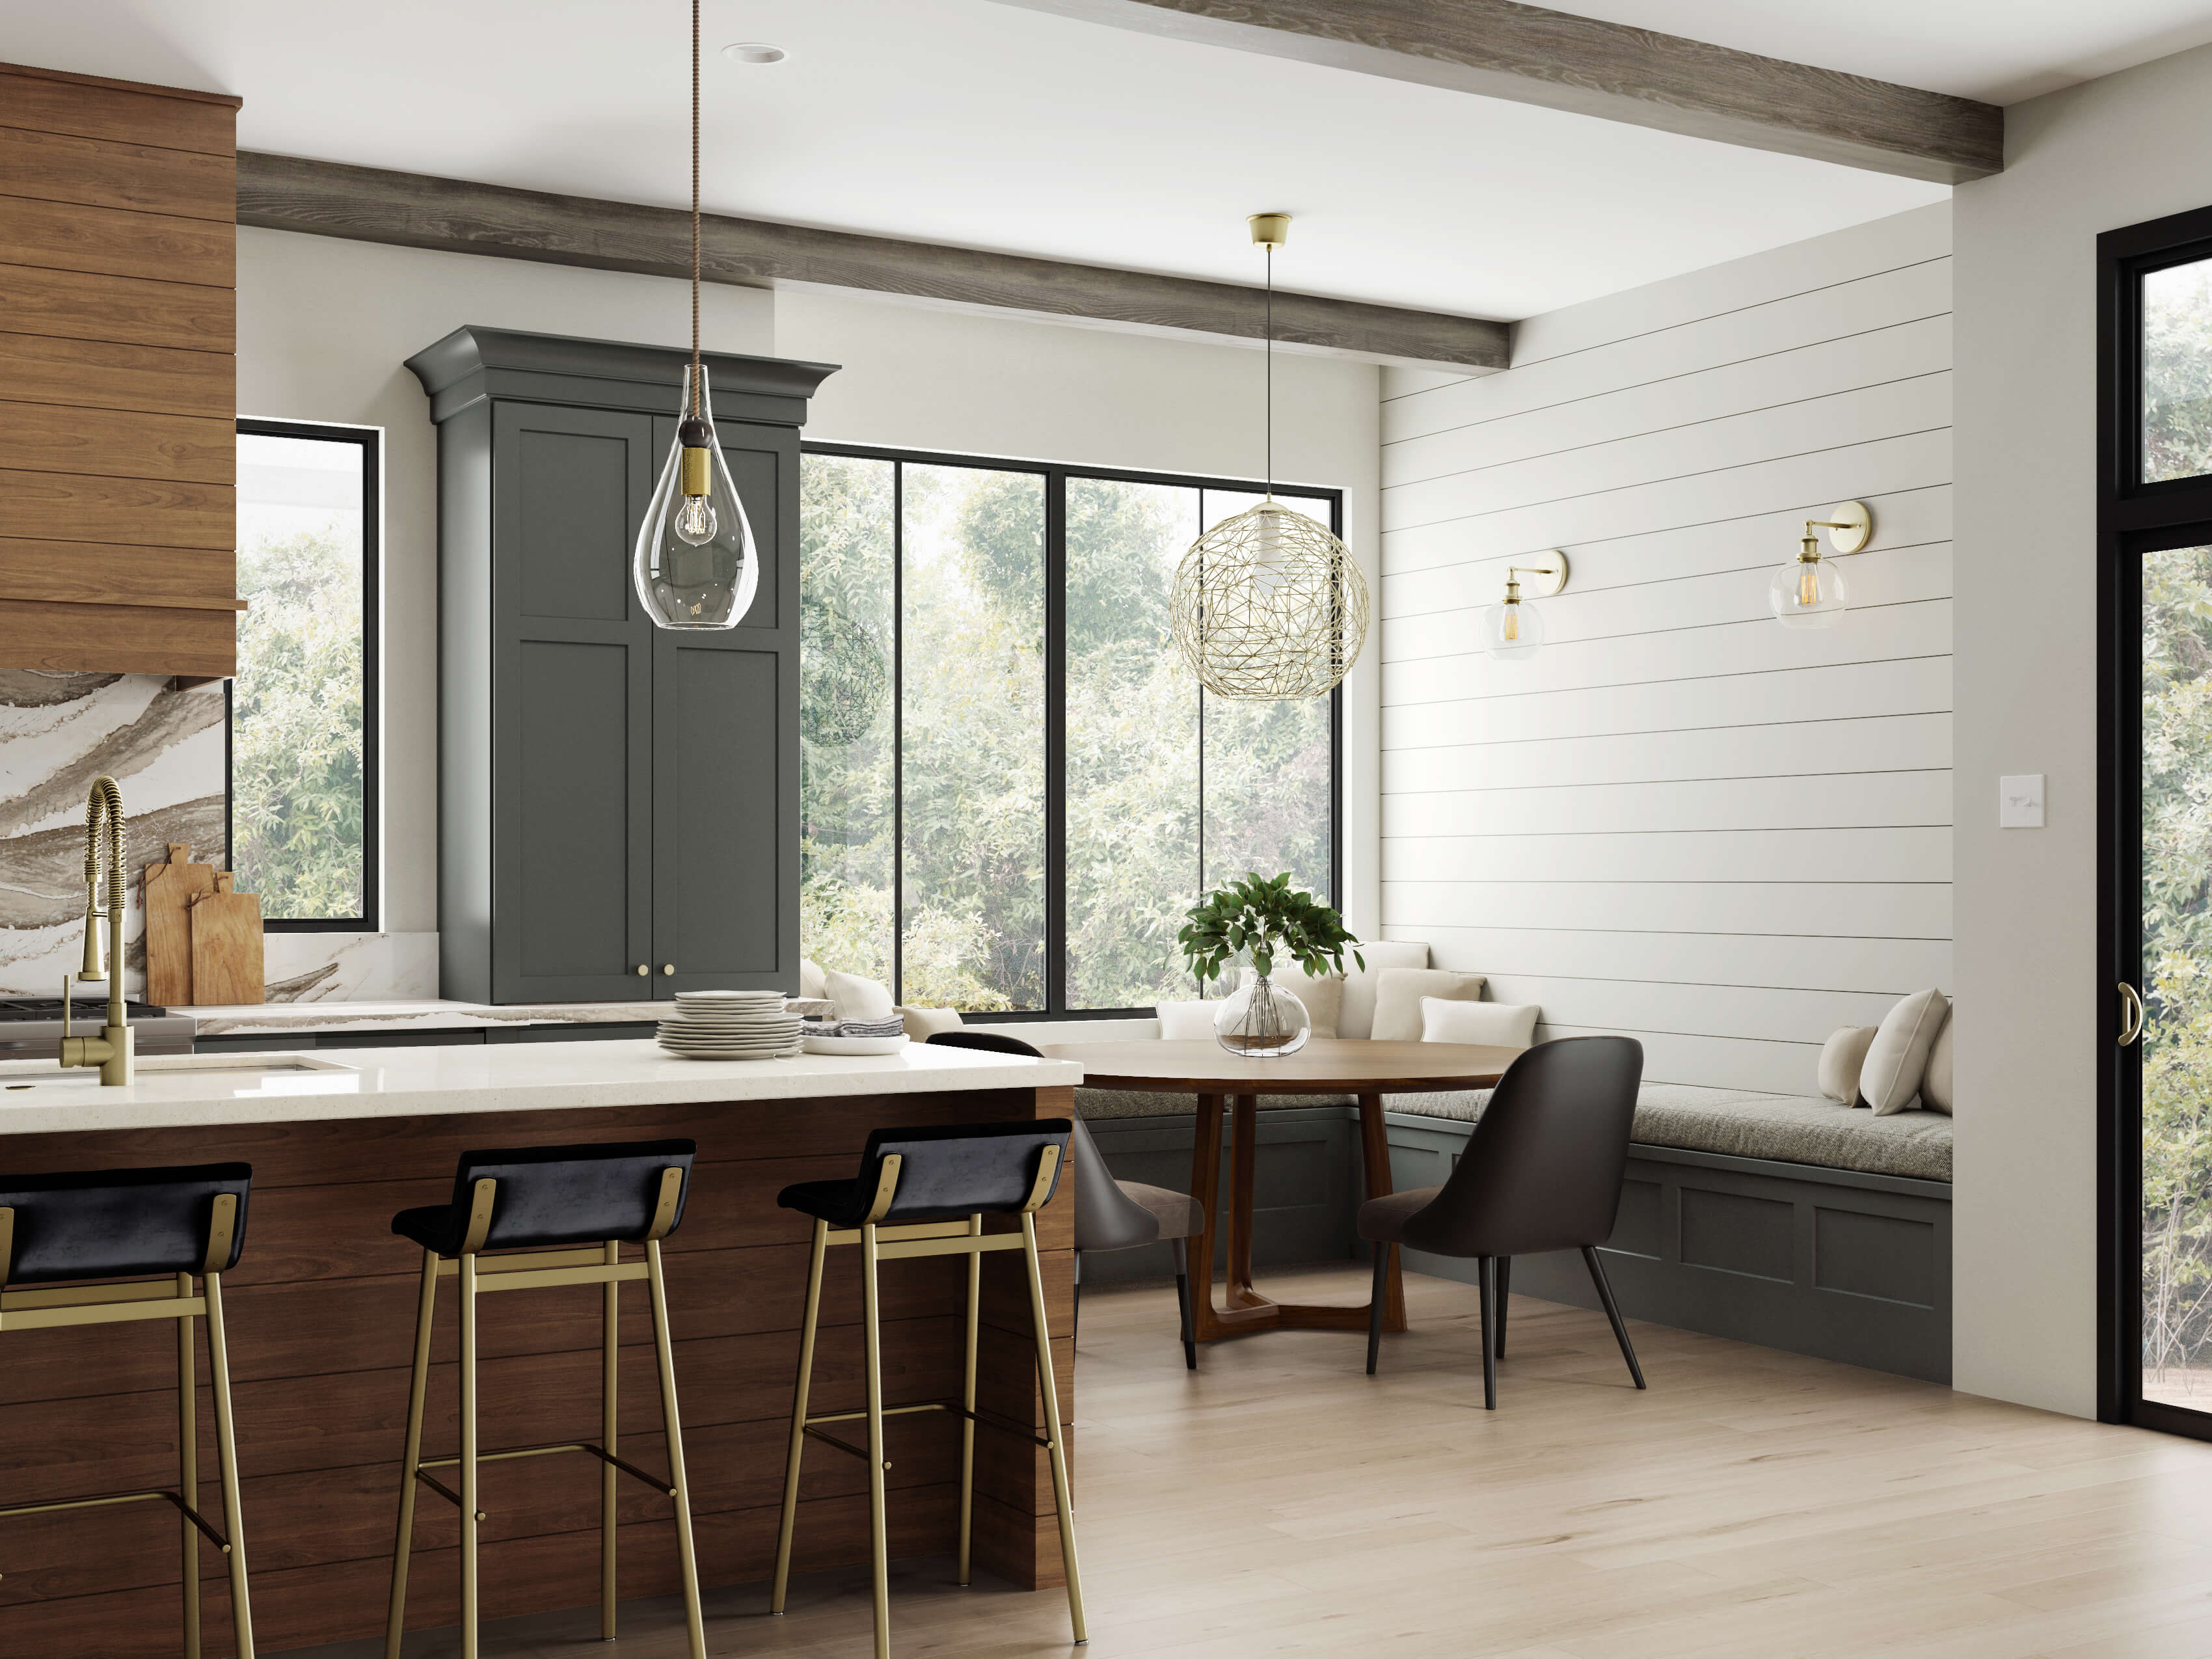 Dark gray-green and rich stained wood kitchen with a breakfast nook and built-in seating in a new modern farmhouse. A shiplap accent wall adds a farmhouse style to the dining area.